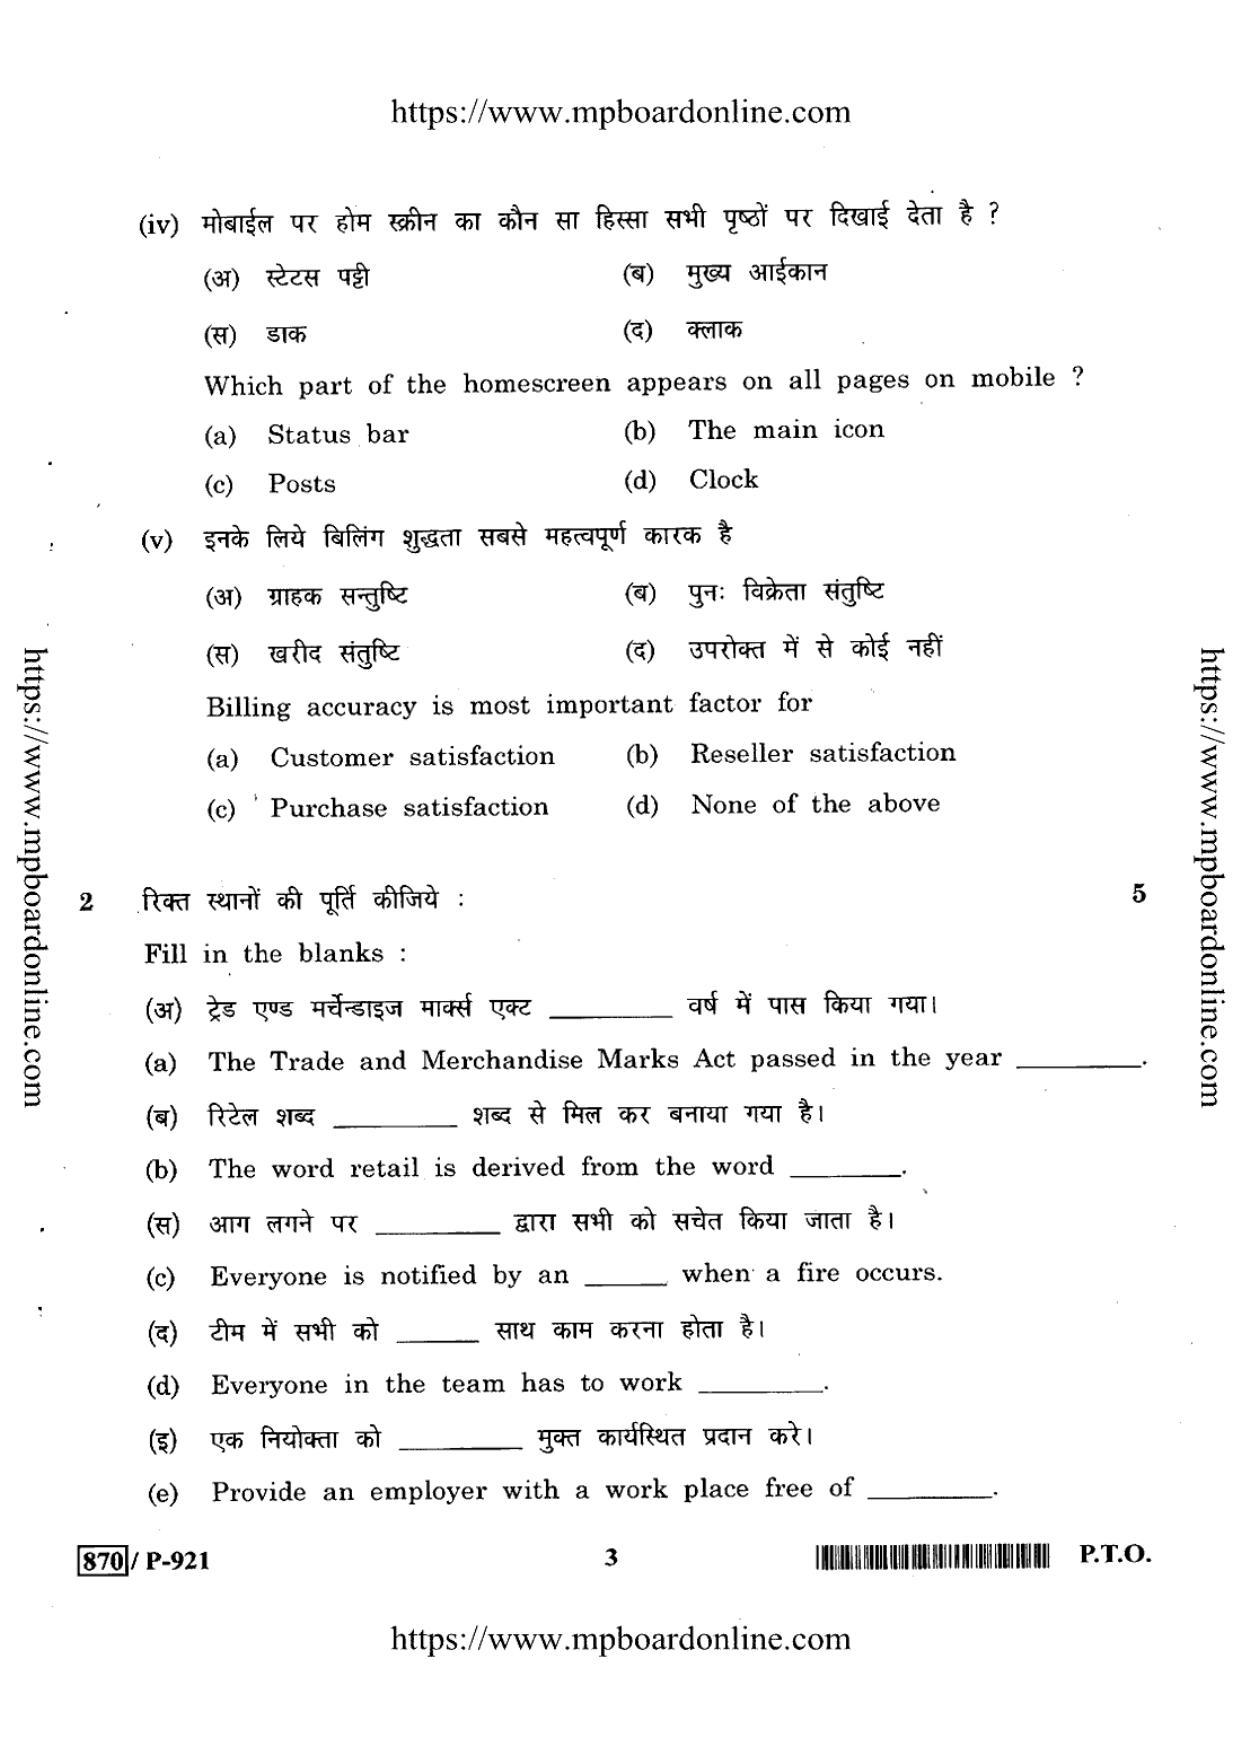 MP Board Class 10 Retail 2020 Question Paper - Page 3